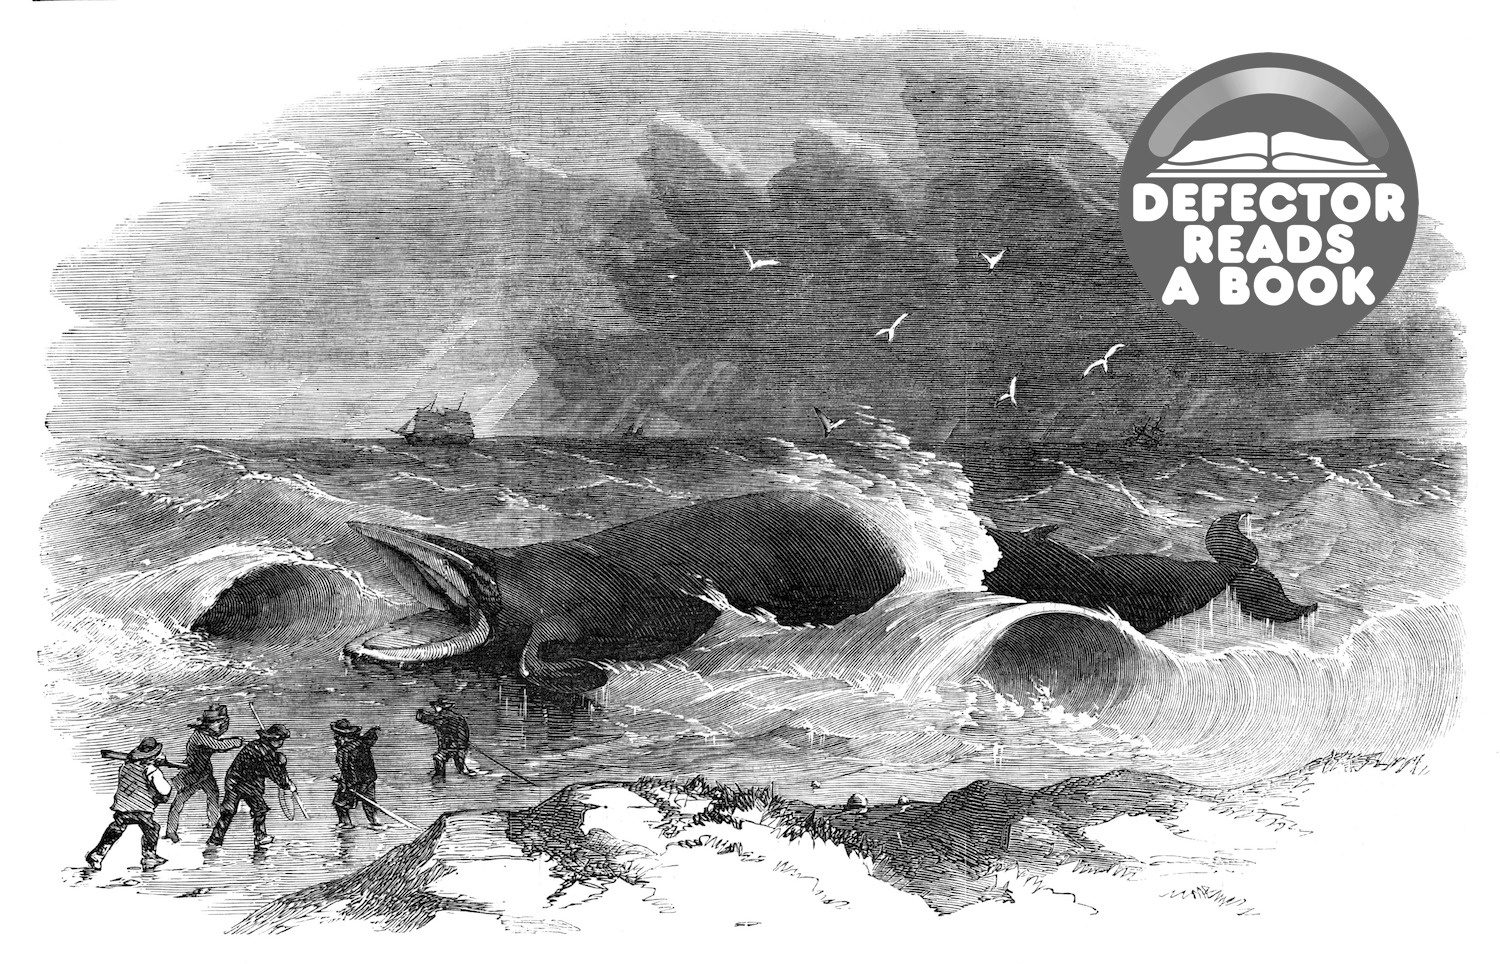 Whale stranded at Winterton, 1857. 'This fine specimen of the whale tribe was driven ashore at Winterton by the gales which visited the coast of Norfolk...When the whale found himself upon land he roared loudly, and he struggled most lustily to regain the deep...The colour of the outer coat is dark brown on the back, vanishing off towards the body of a bluish grey. The body is white; also about two feet of the nose and baleen is white; the rest of the outer part is black. We understand that the skin, head, and tail were removed from the carcase for exhibition. The whale is stated to weigh about 25 tons'. From &quot;Illustrated London News&quot;, 1857.